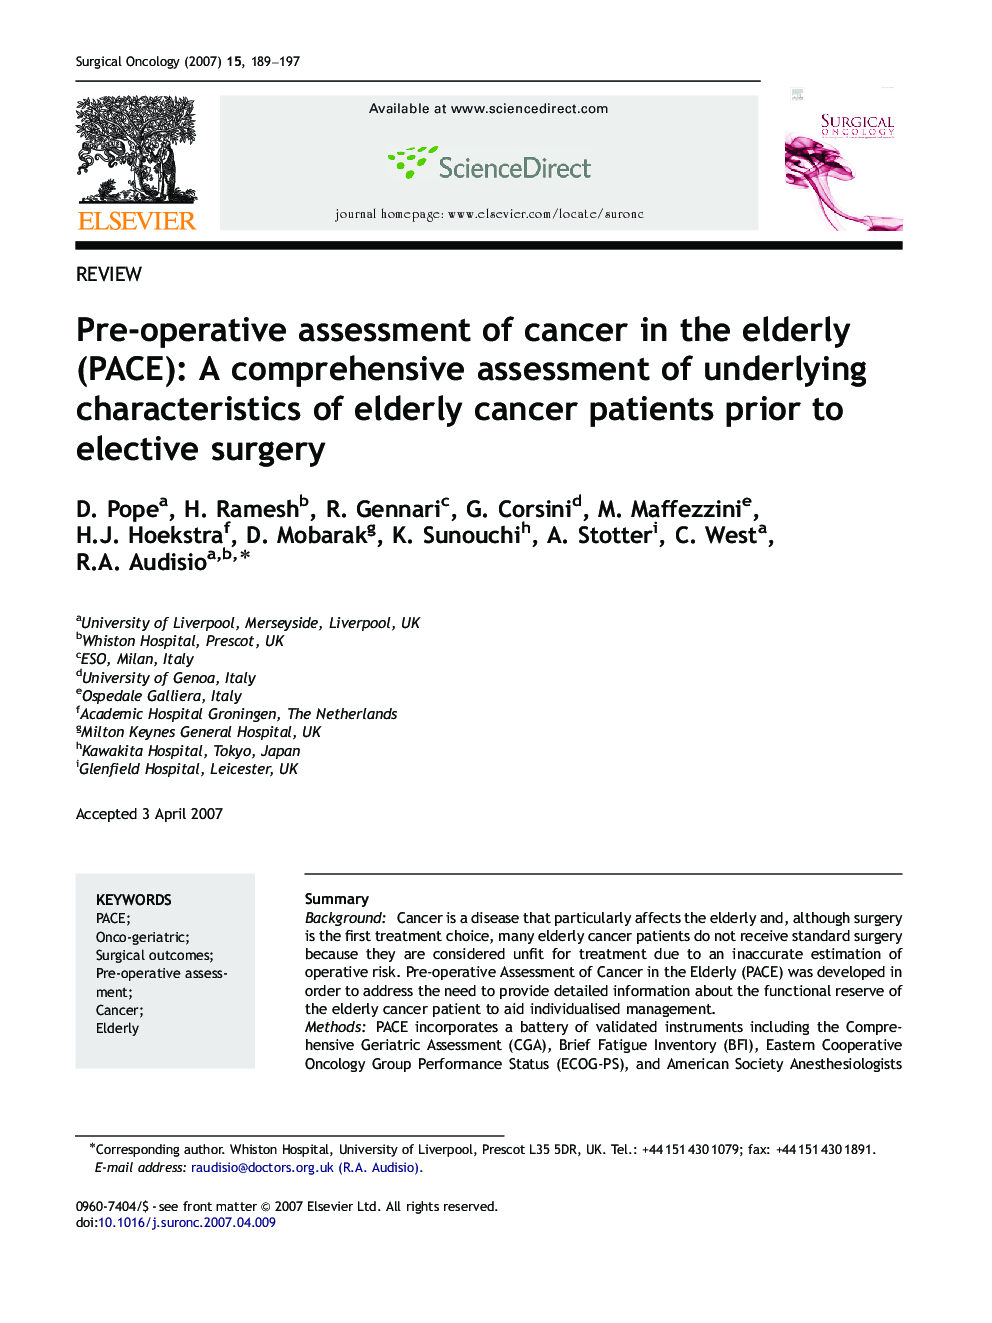 Pre-operative assessment of cancer in the elderly (PACE): A comprehensive assessment of underlying characteristics of elderly cancer patients prior to elective surgery